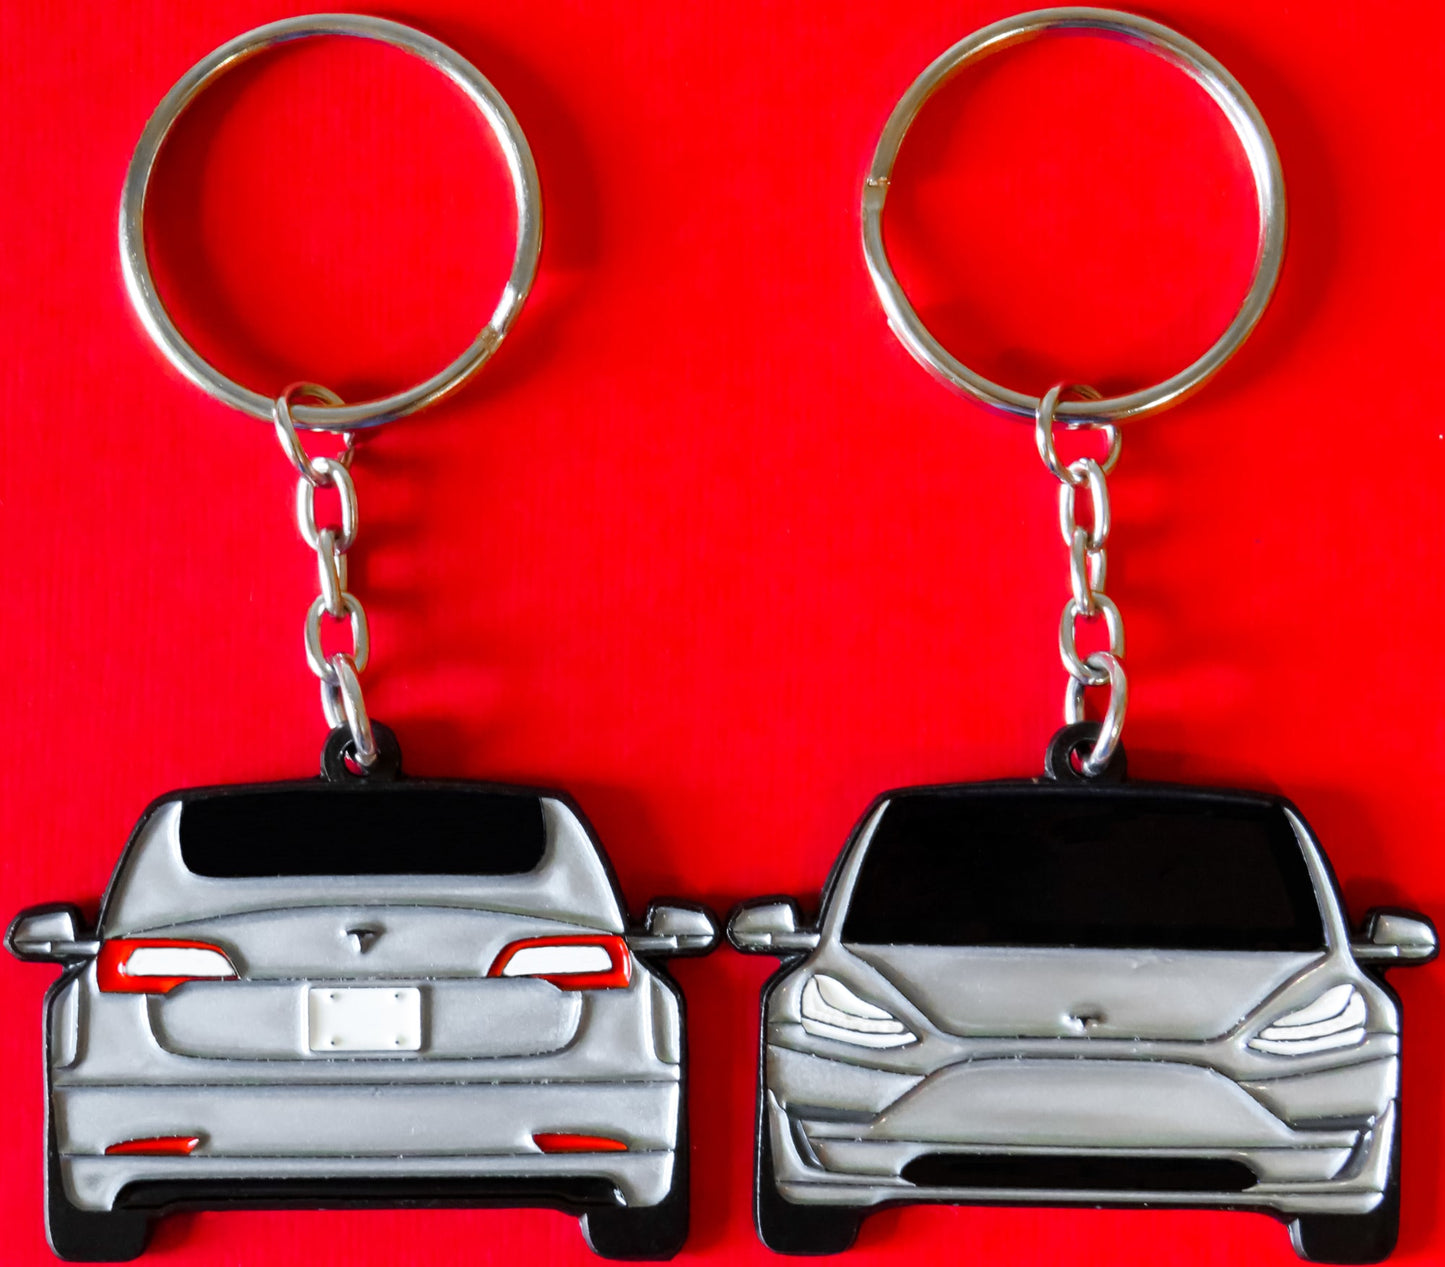 Enamel Keychain Pin Patch Lanyard that fits on a key fob cover for Tesla Model 3. A great accessory for EV owners and enthusiasts along with accessories, jet tag, key ring gift ideas for car guys, car enthusiasts, gearheads, father, mother, dad, mom, him, her, boyfriend, girlfriend and more.